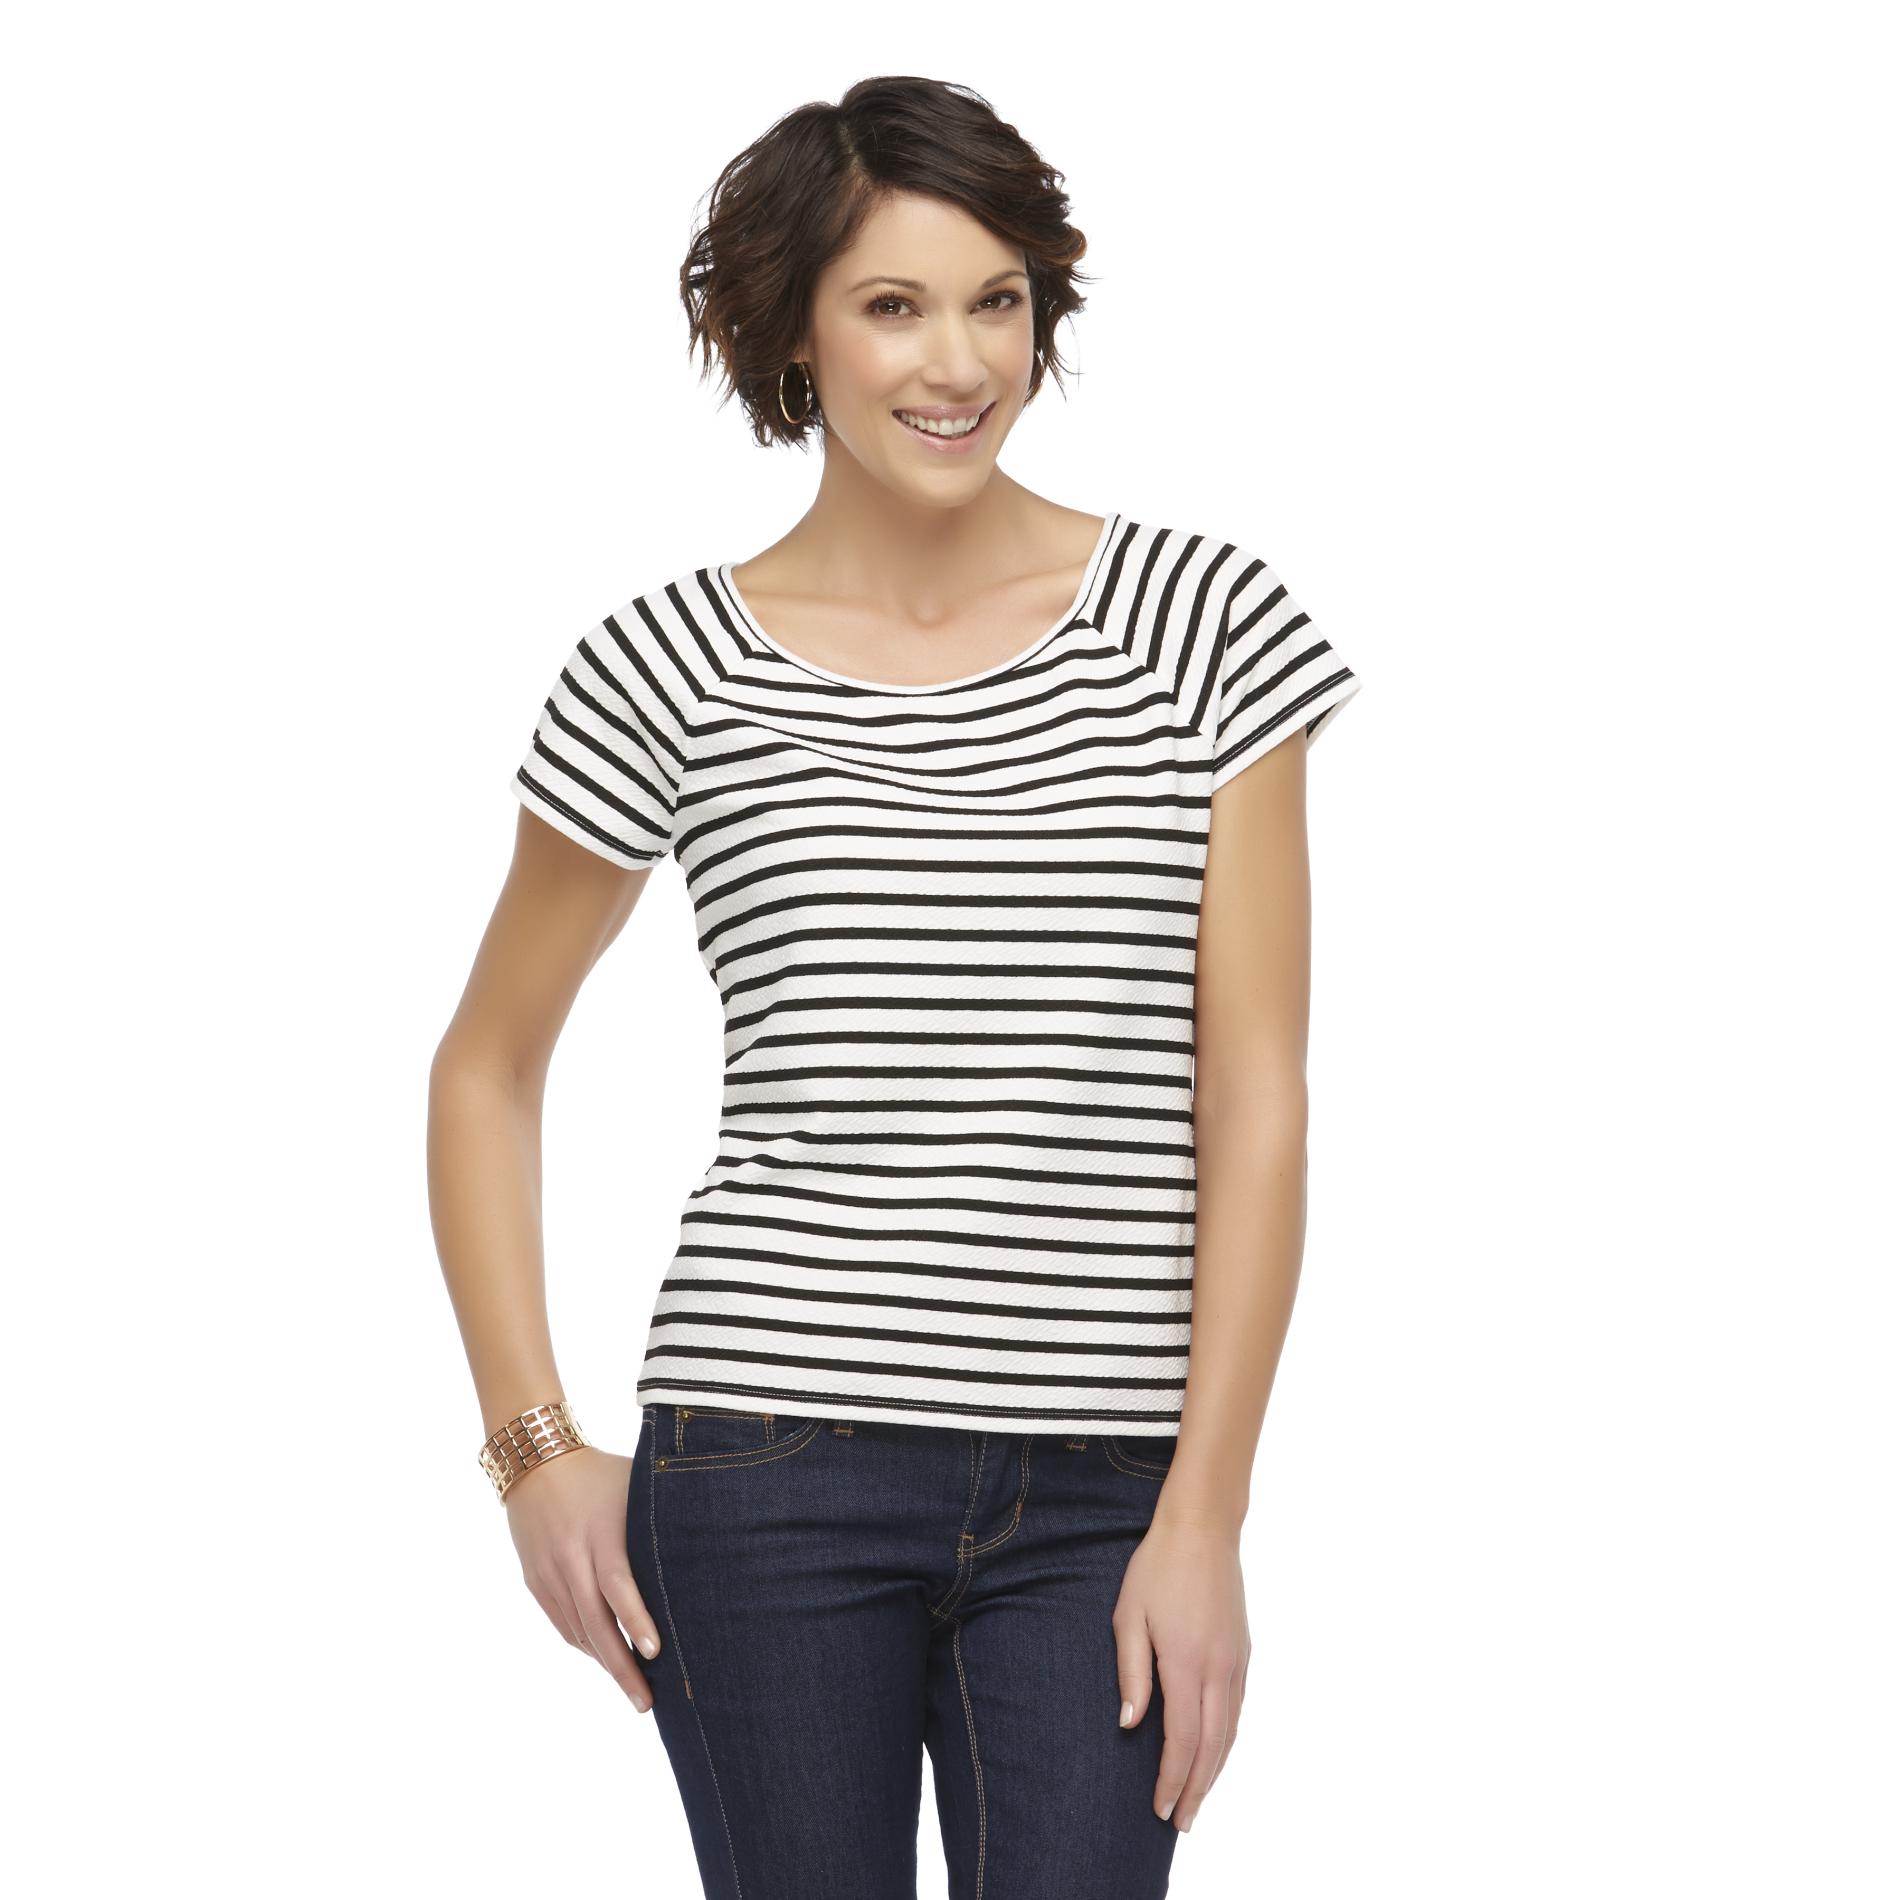 Jaclyn Smith Women's Textured T-Shirt - Striped